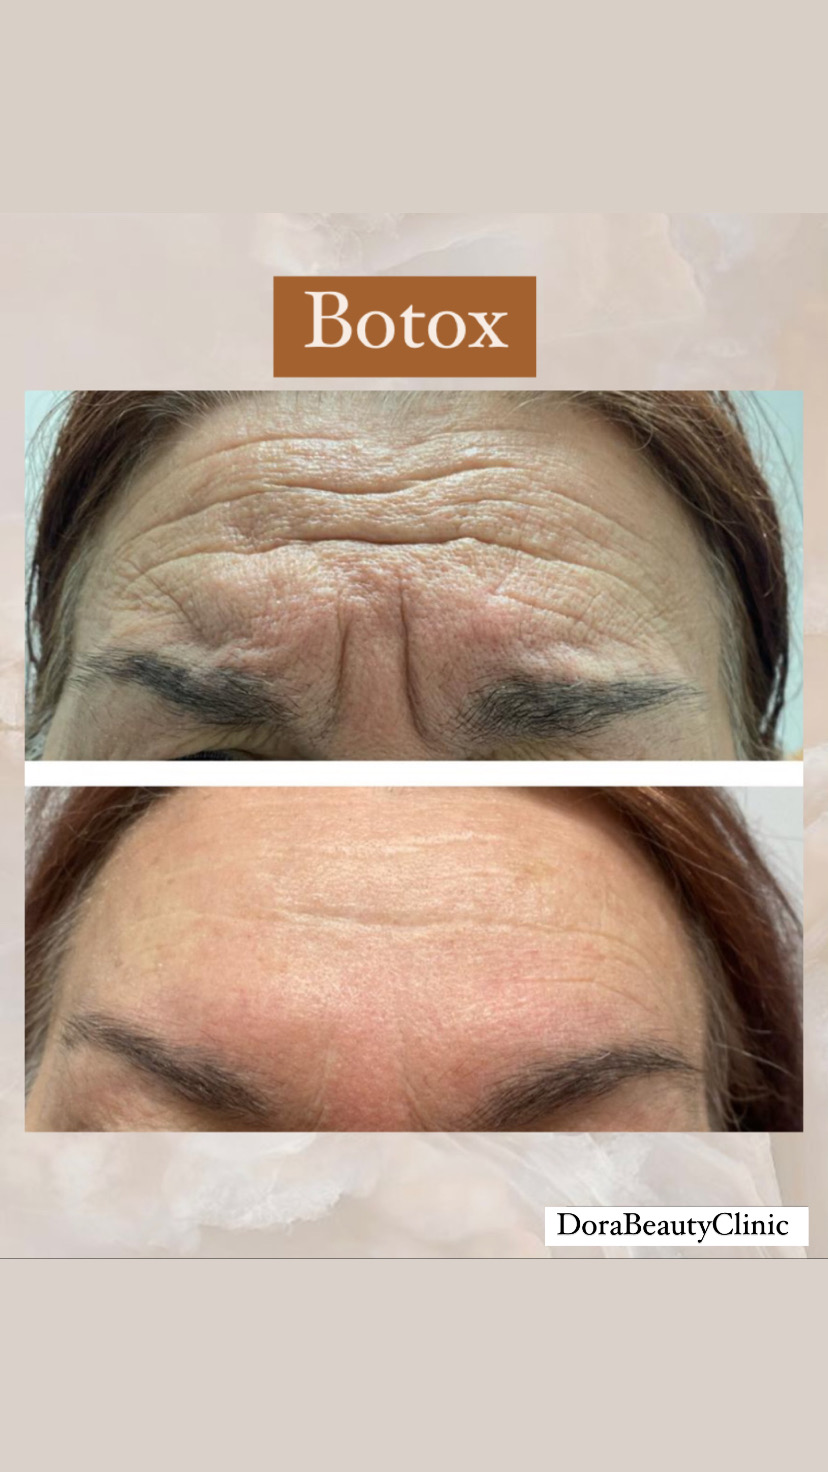 Botox Treatment for Forehead Wrinkles Before and After at Dora Beauty Clinic, London